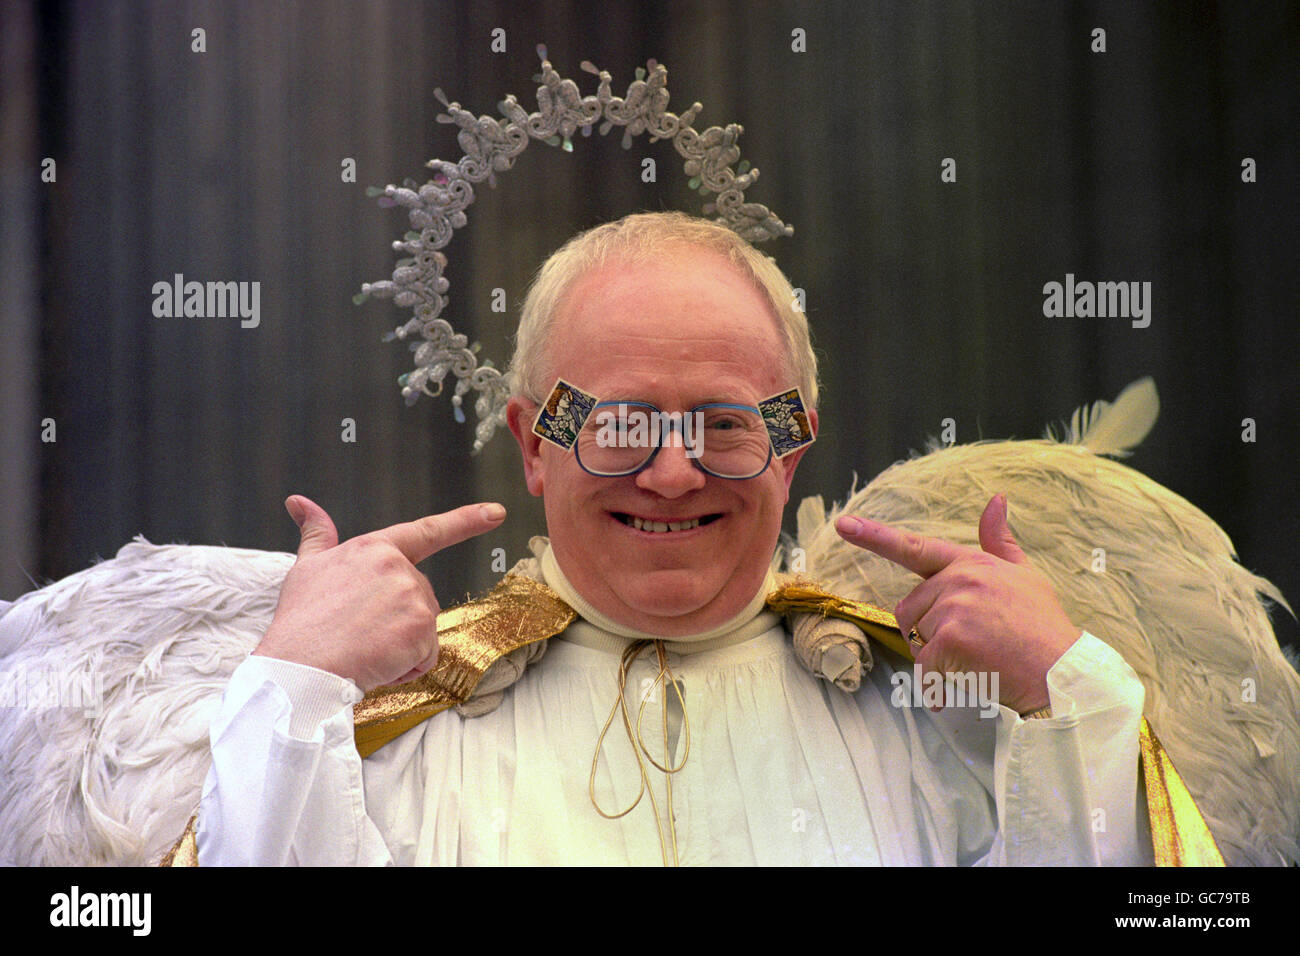 ACTOR KEN MORLEY WHO PLAYS CORONATION STREET STAR REG HOULDSWORTH TAKES AN ANGELIC POSE ON THE STEPS OF ST PAUL'S CATHEDRAL DRESSED AS AN ANGEL, TO LAUNCH THE ROYAL MAIL'S CHRISTMAS STAMPS. Stock Photo